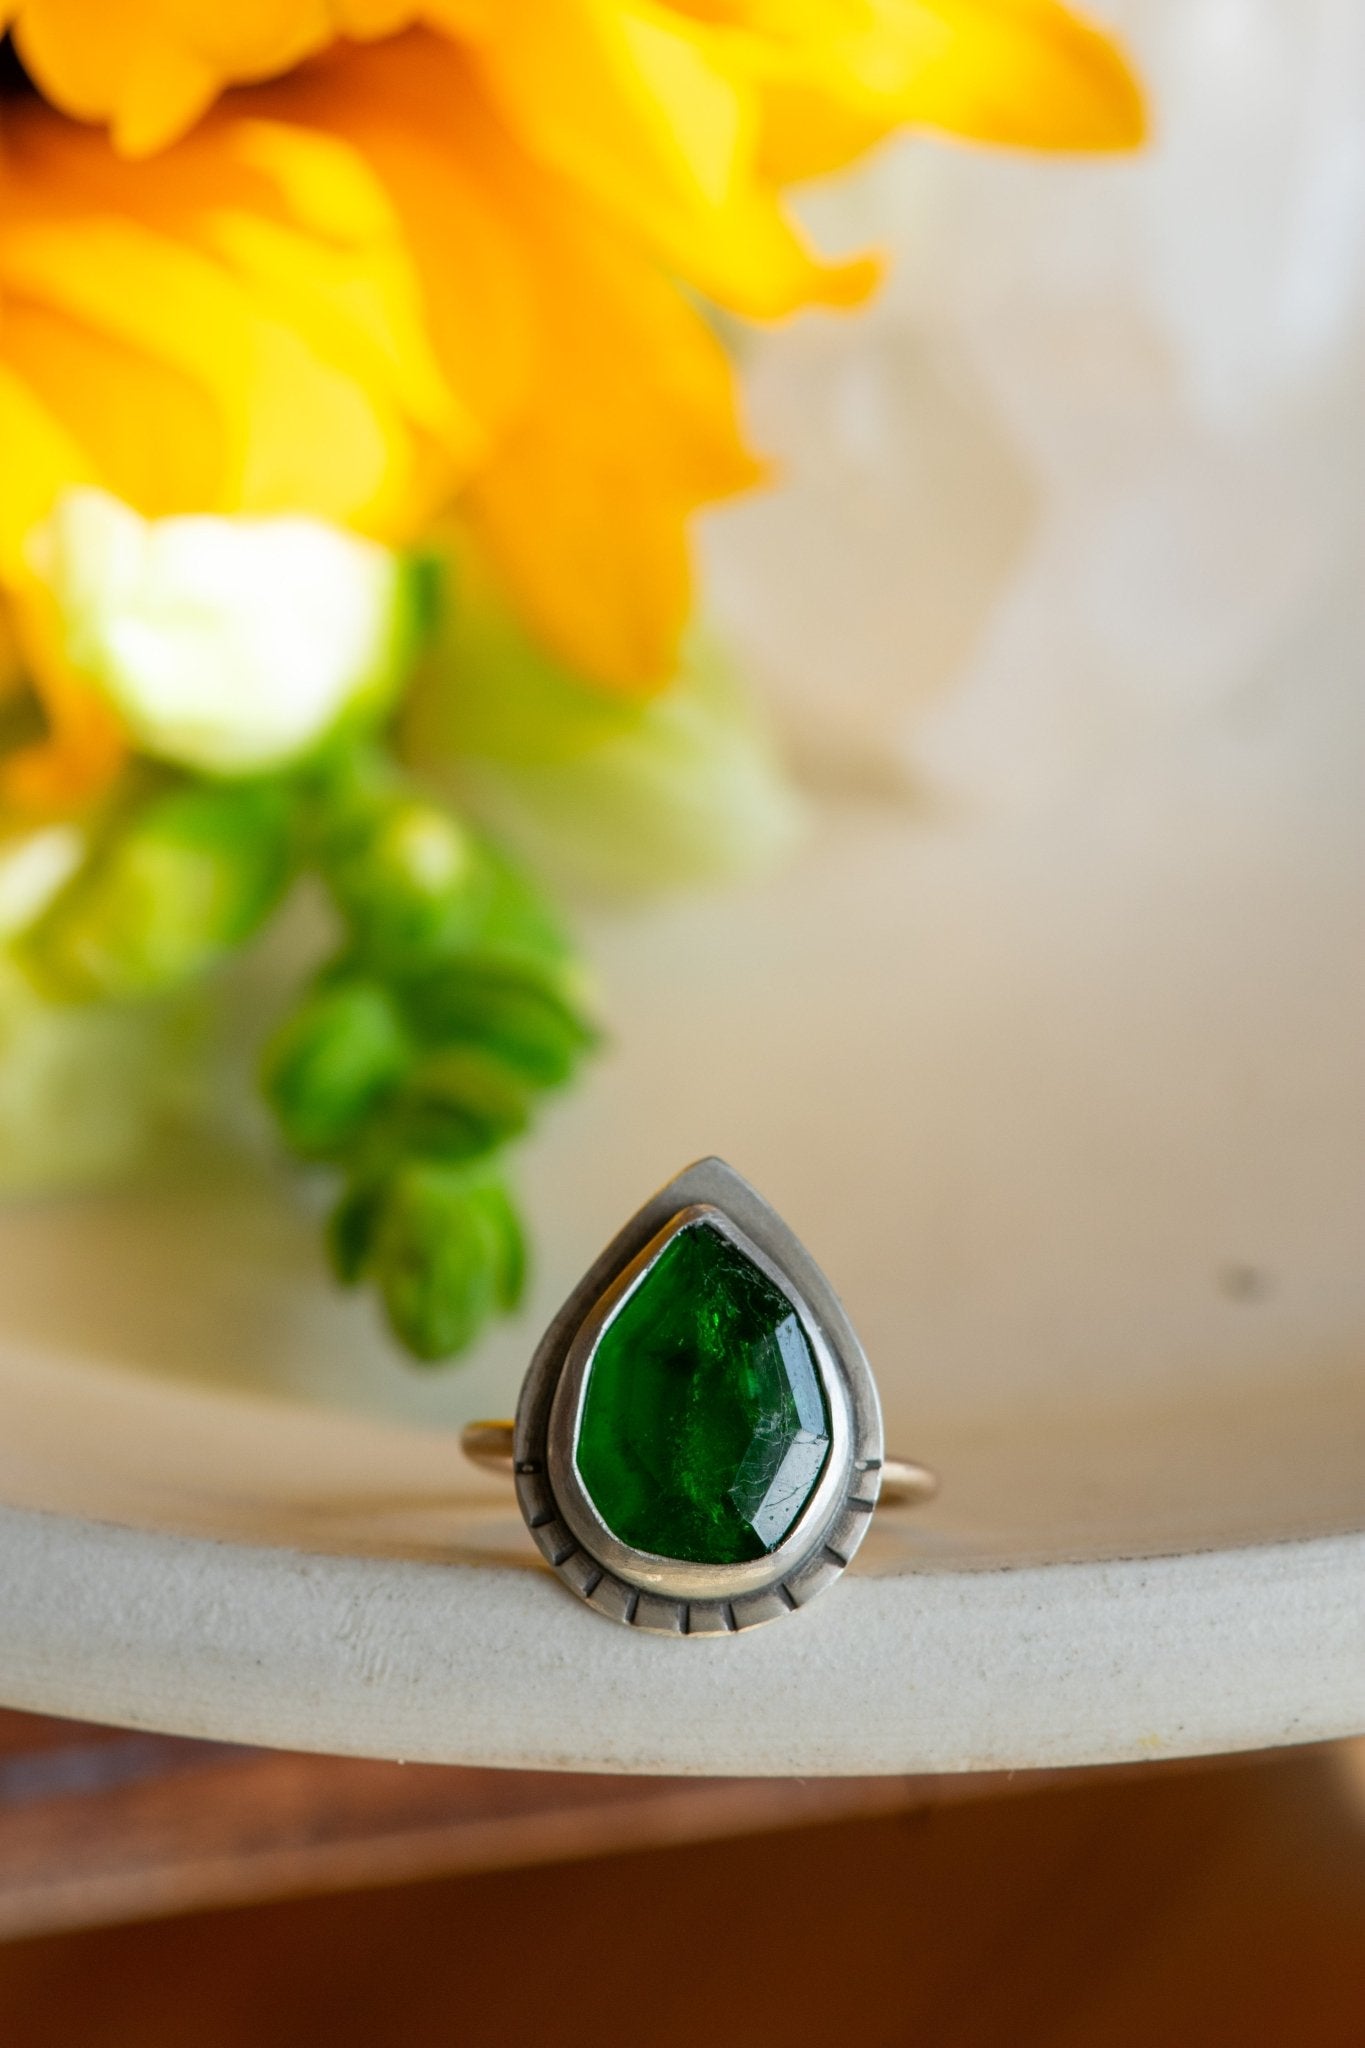 CHANGELING CHROME DIOPSIDE RING - Fly Free